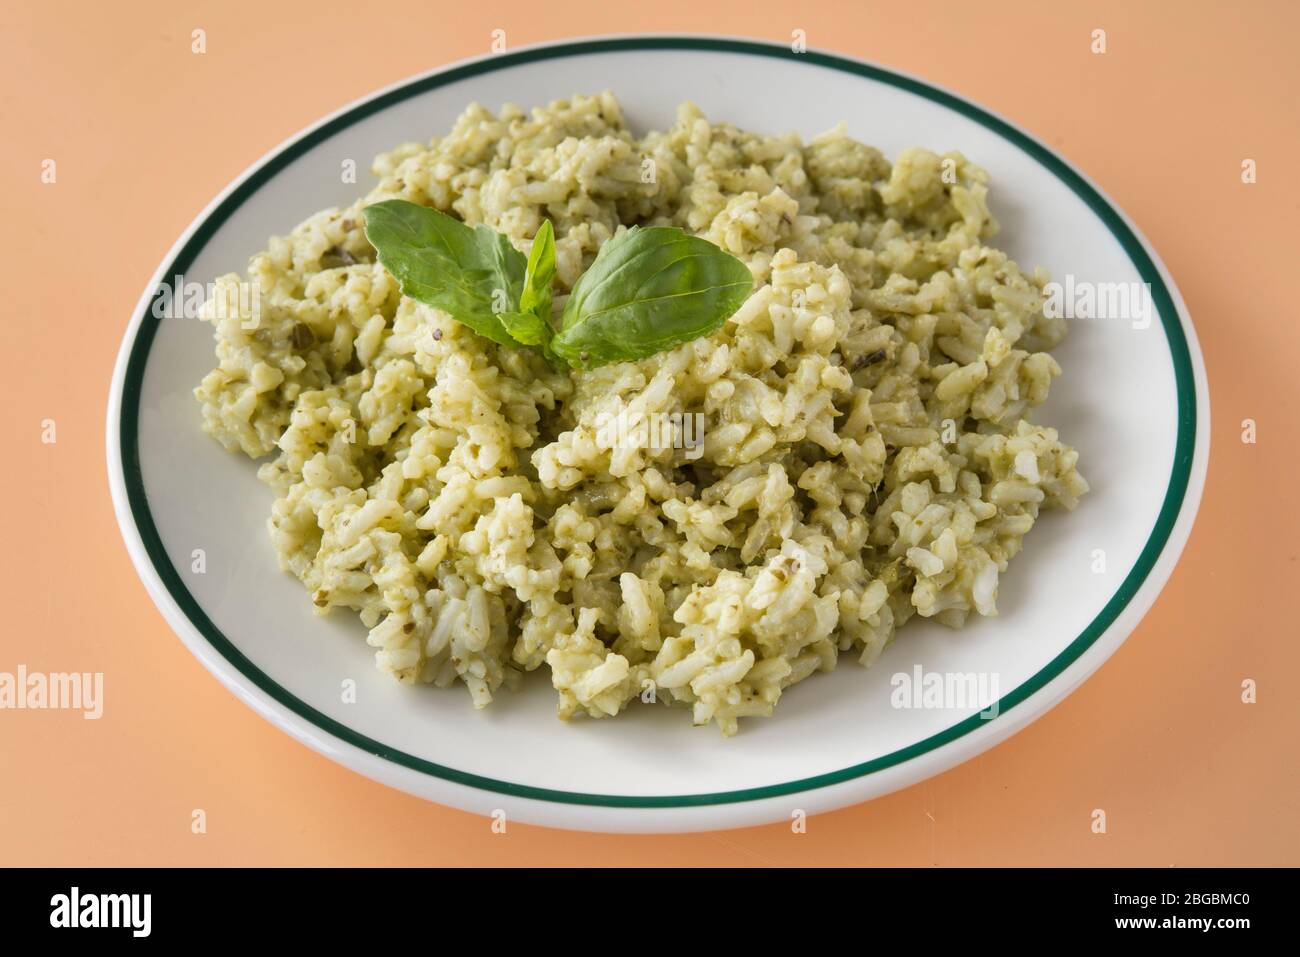 Traditional Mexican Arroz Verde green rice dish made of long-grain rice, spinach, cilantro and garlic. Stock Photo